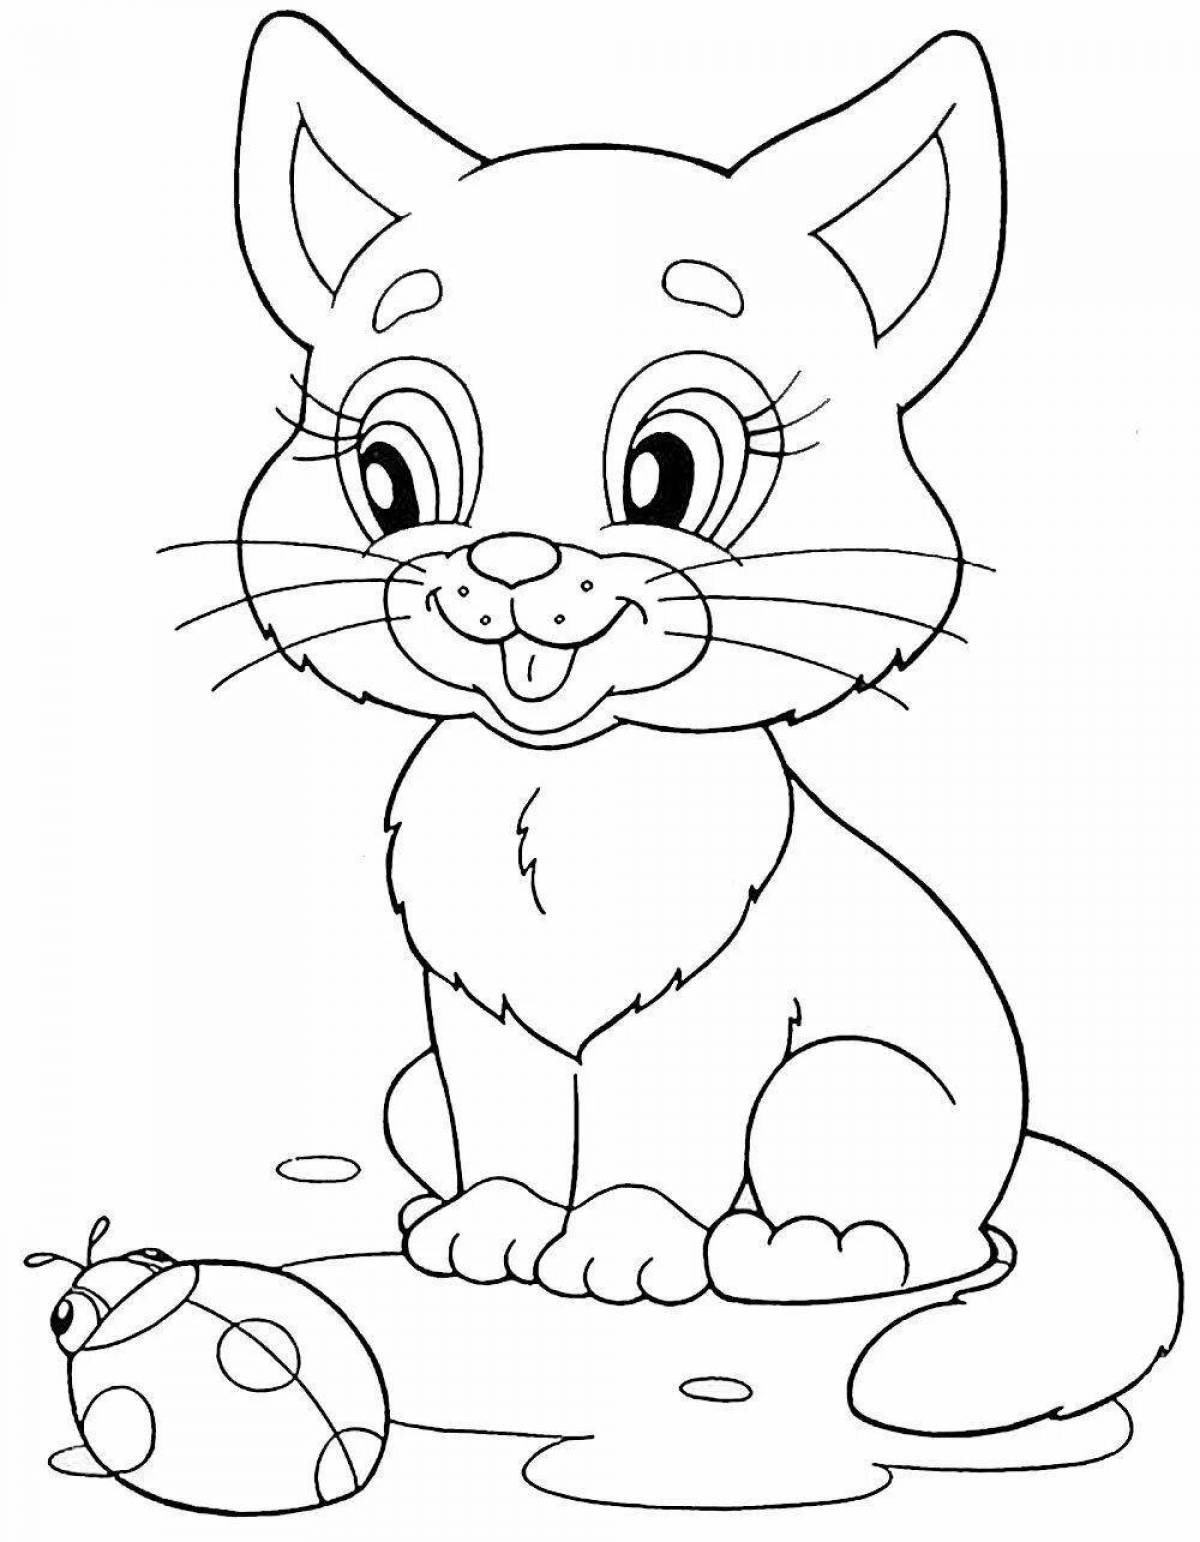 Great animal coloring book for kids